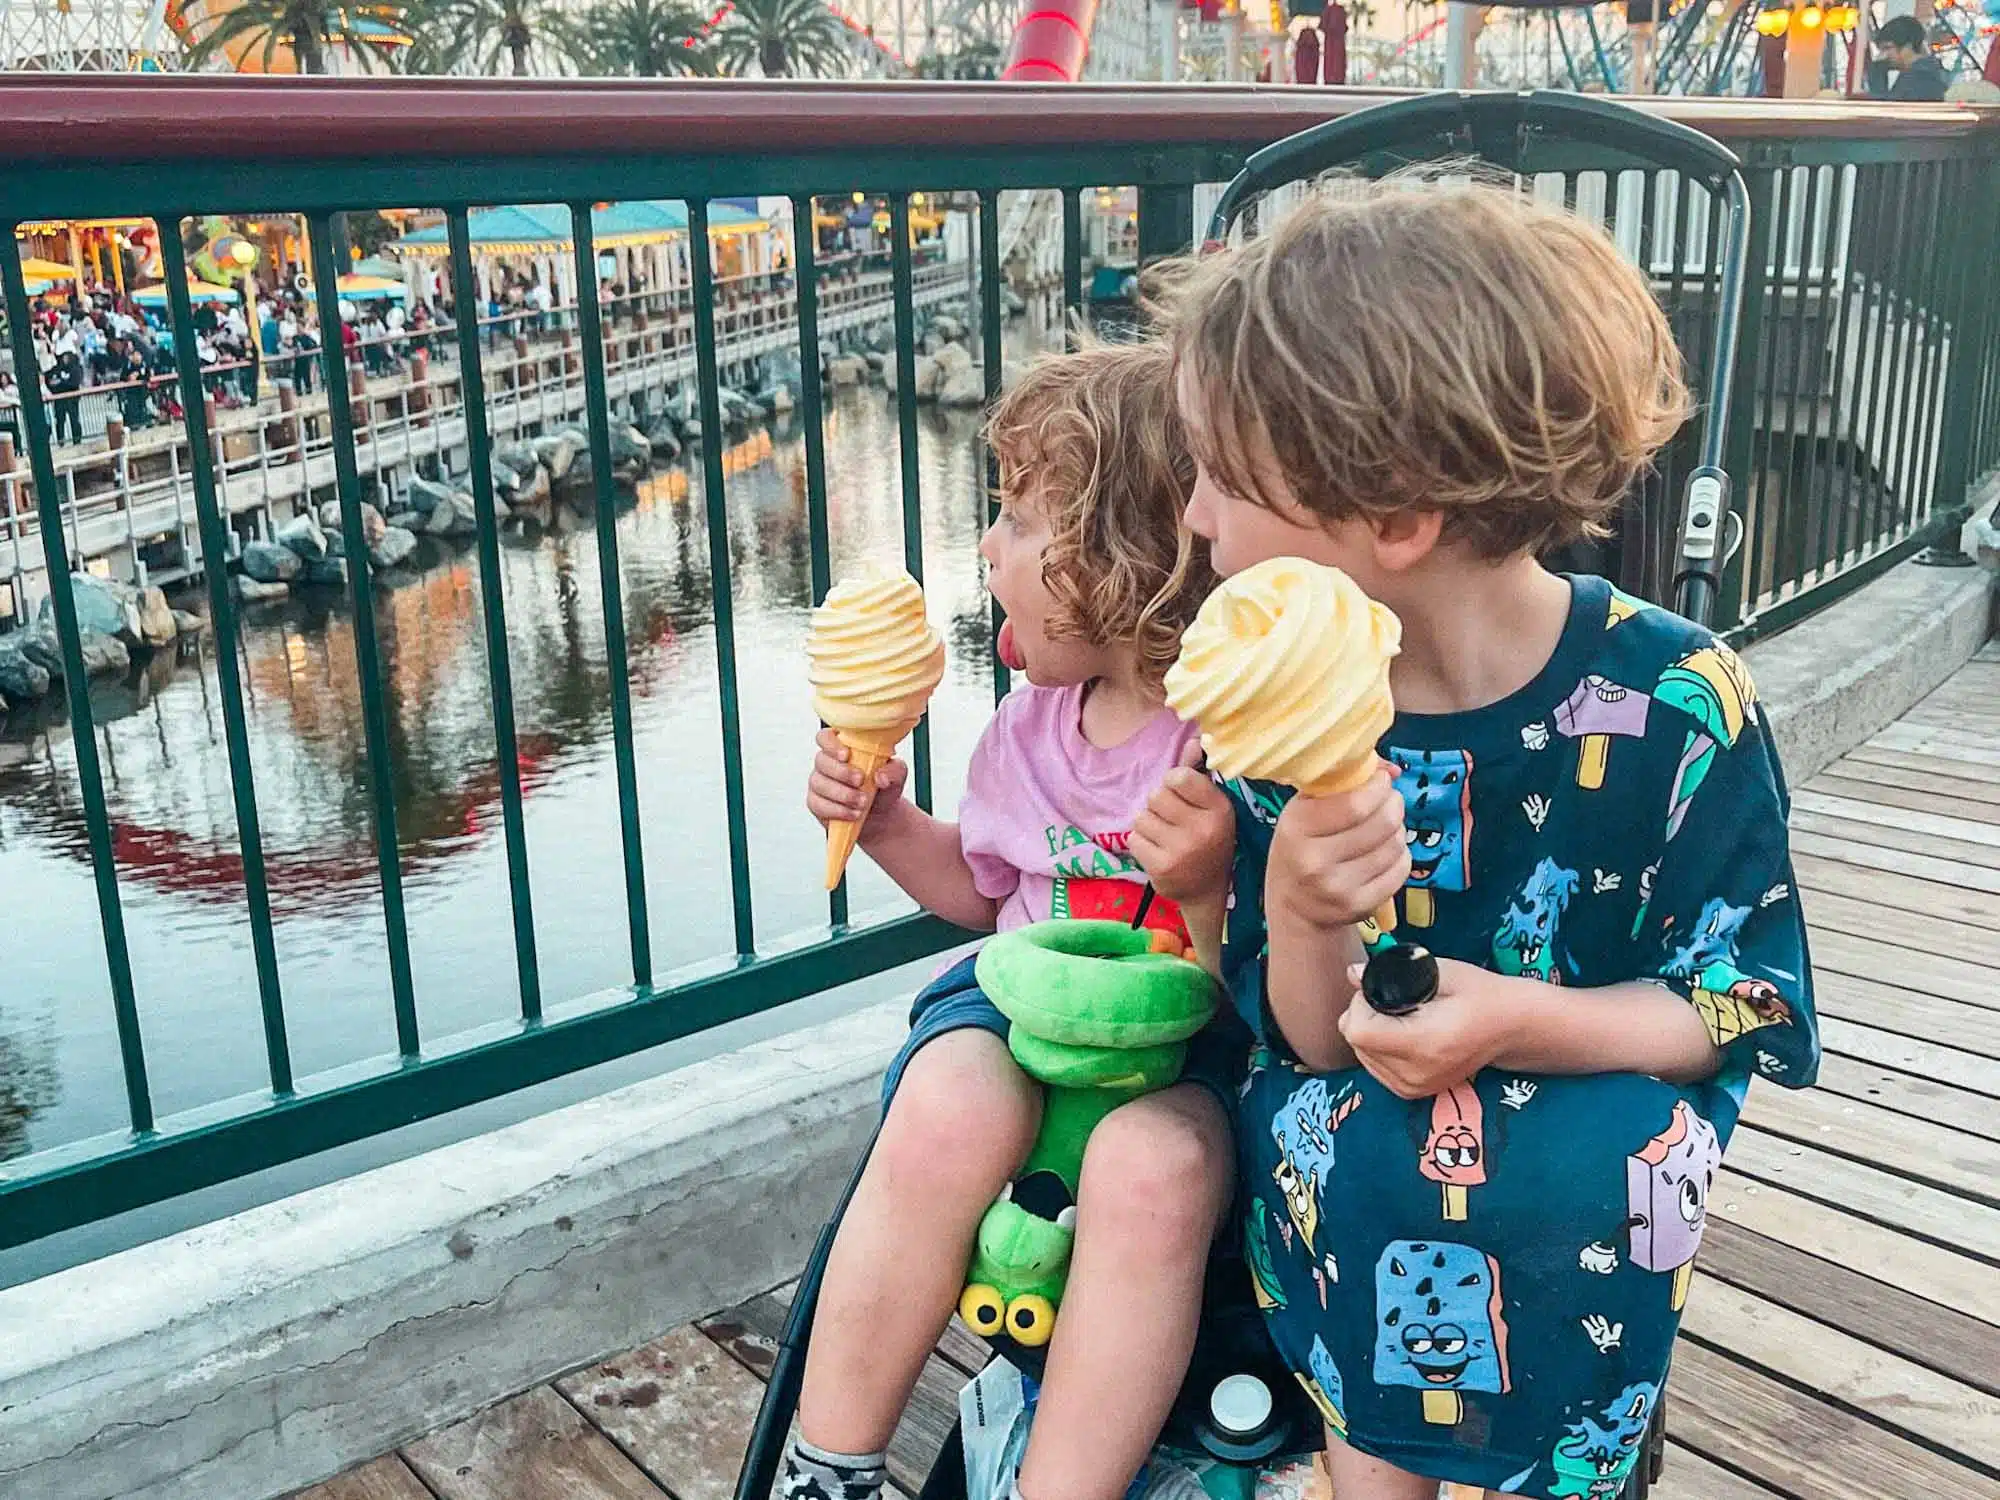 Otis and Arlo eating dole whip at DCA.